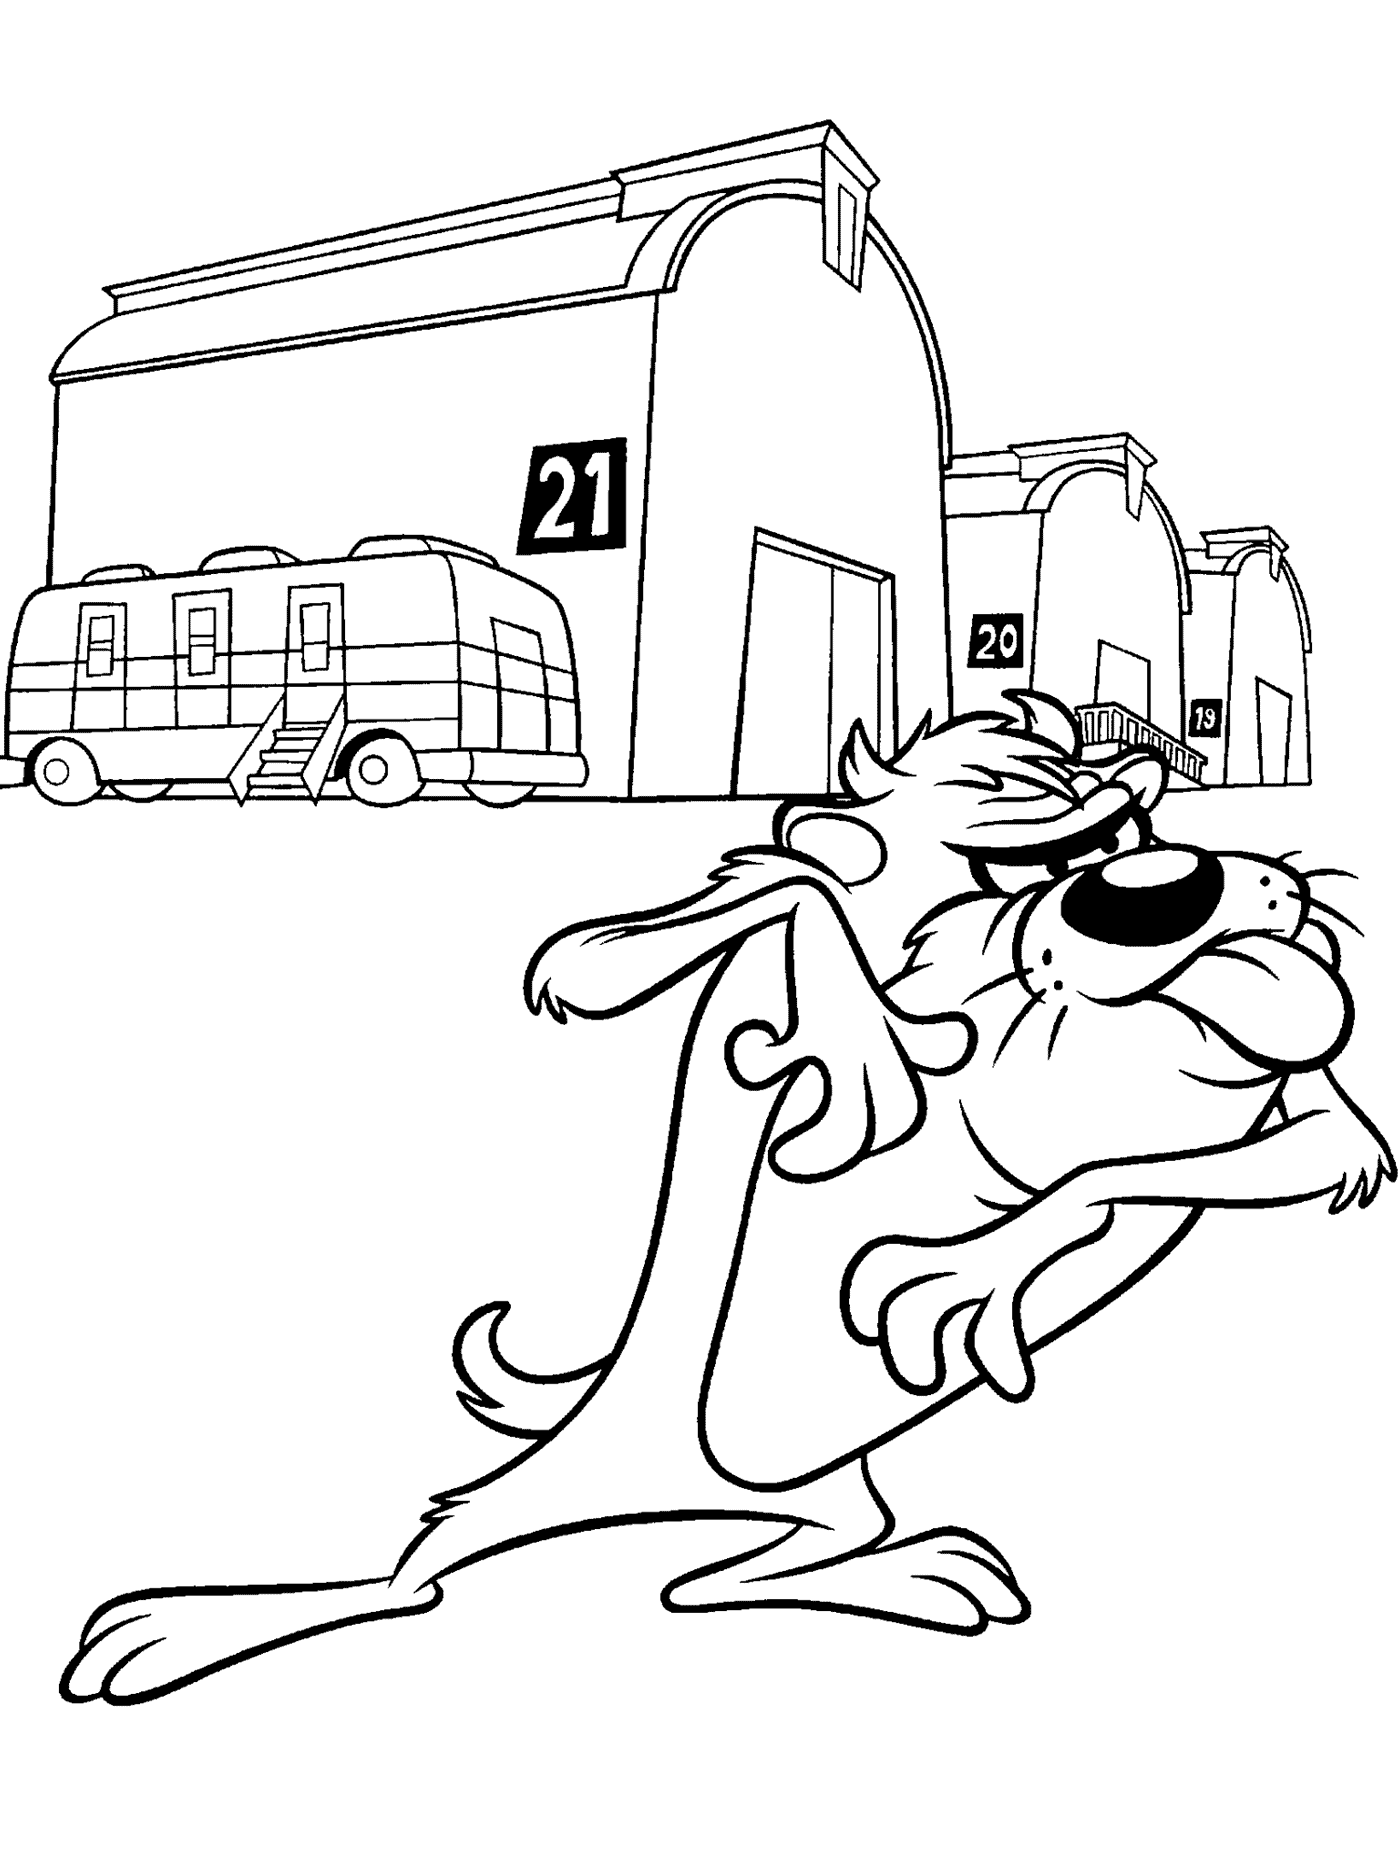 Taz the Tasmanian Devil Coloring page : LOONEY TUNES SPOT COLORING